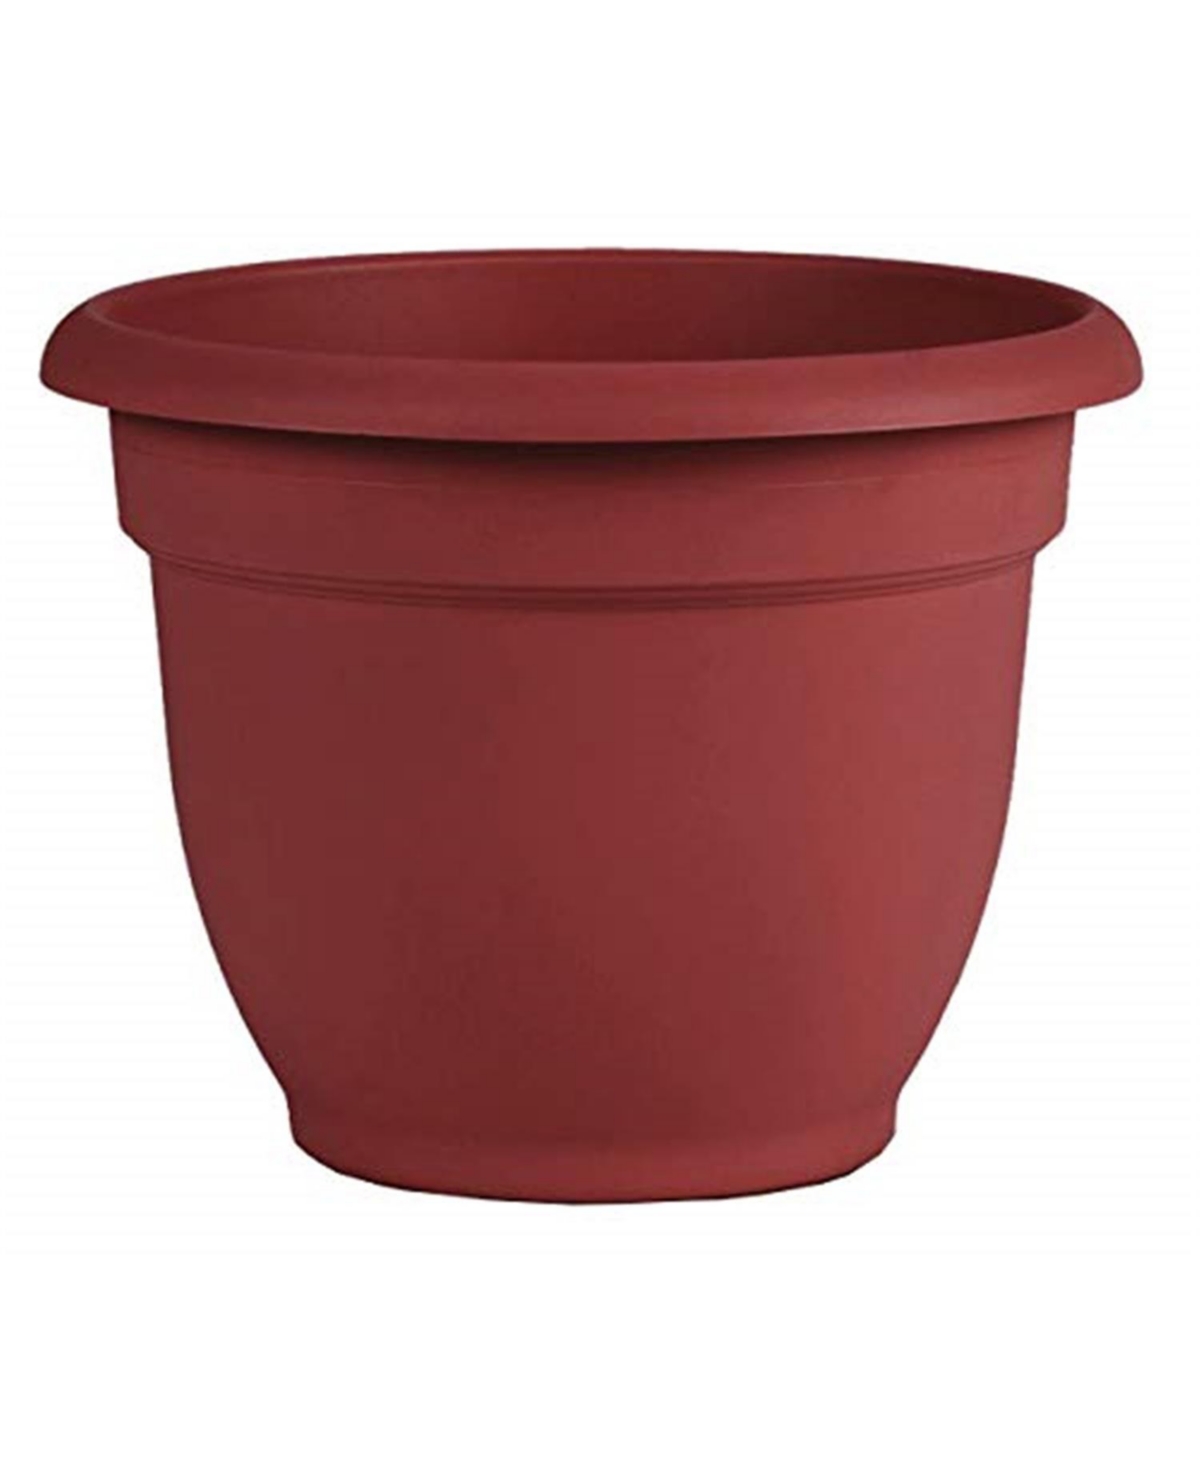 AP0613 Ariana Planter with Self-Watering Disk, Burnt Red - 6 inches - Red